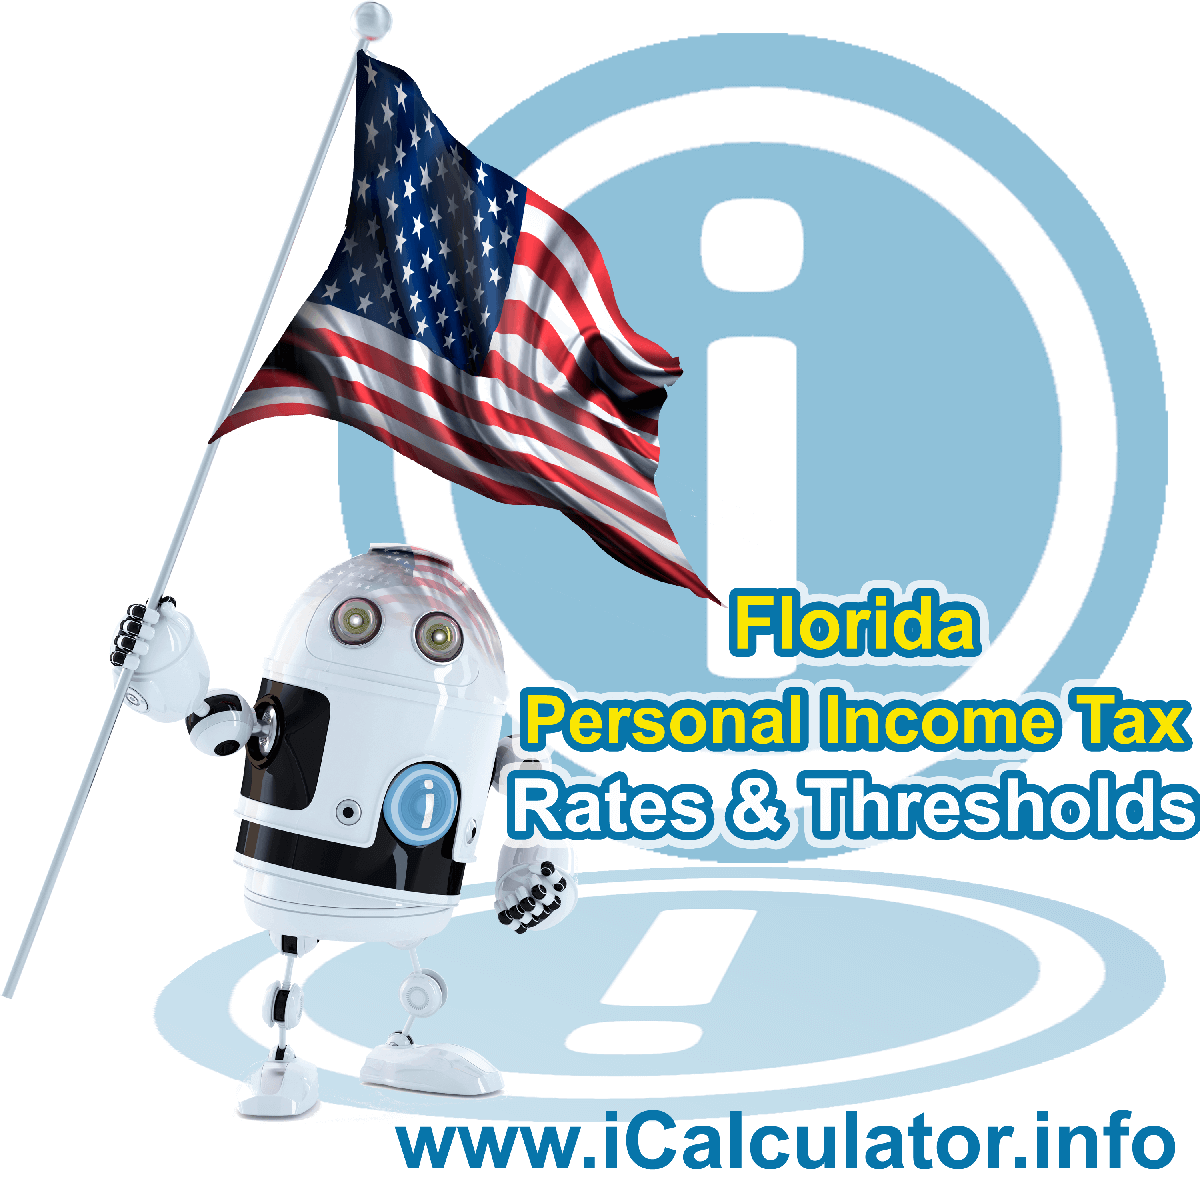 Florida State Tax Tables 2018. This image displays details of the Florida State Tax Tables for the 2018 tax return year which is provided in support of the 2018 US Tax Calculator